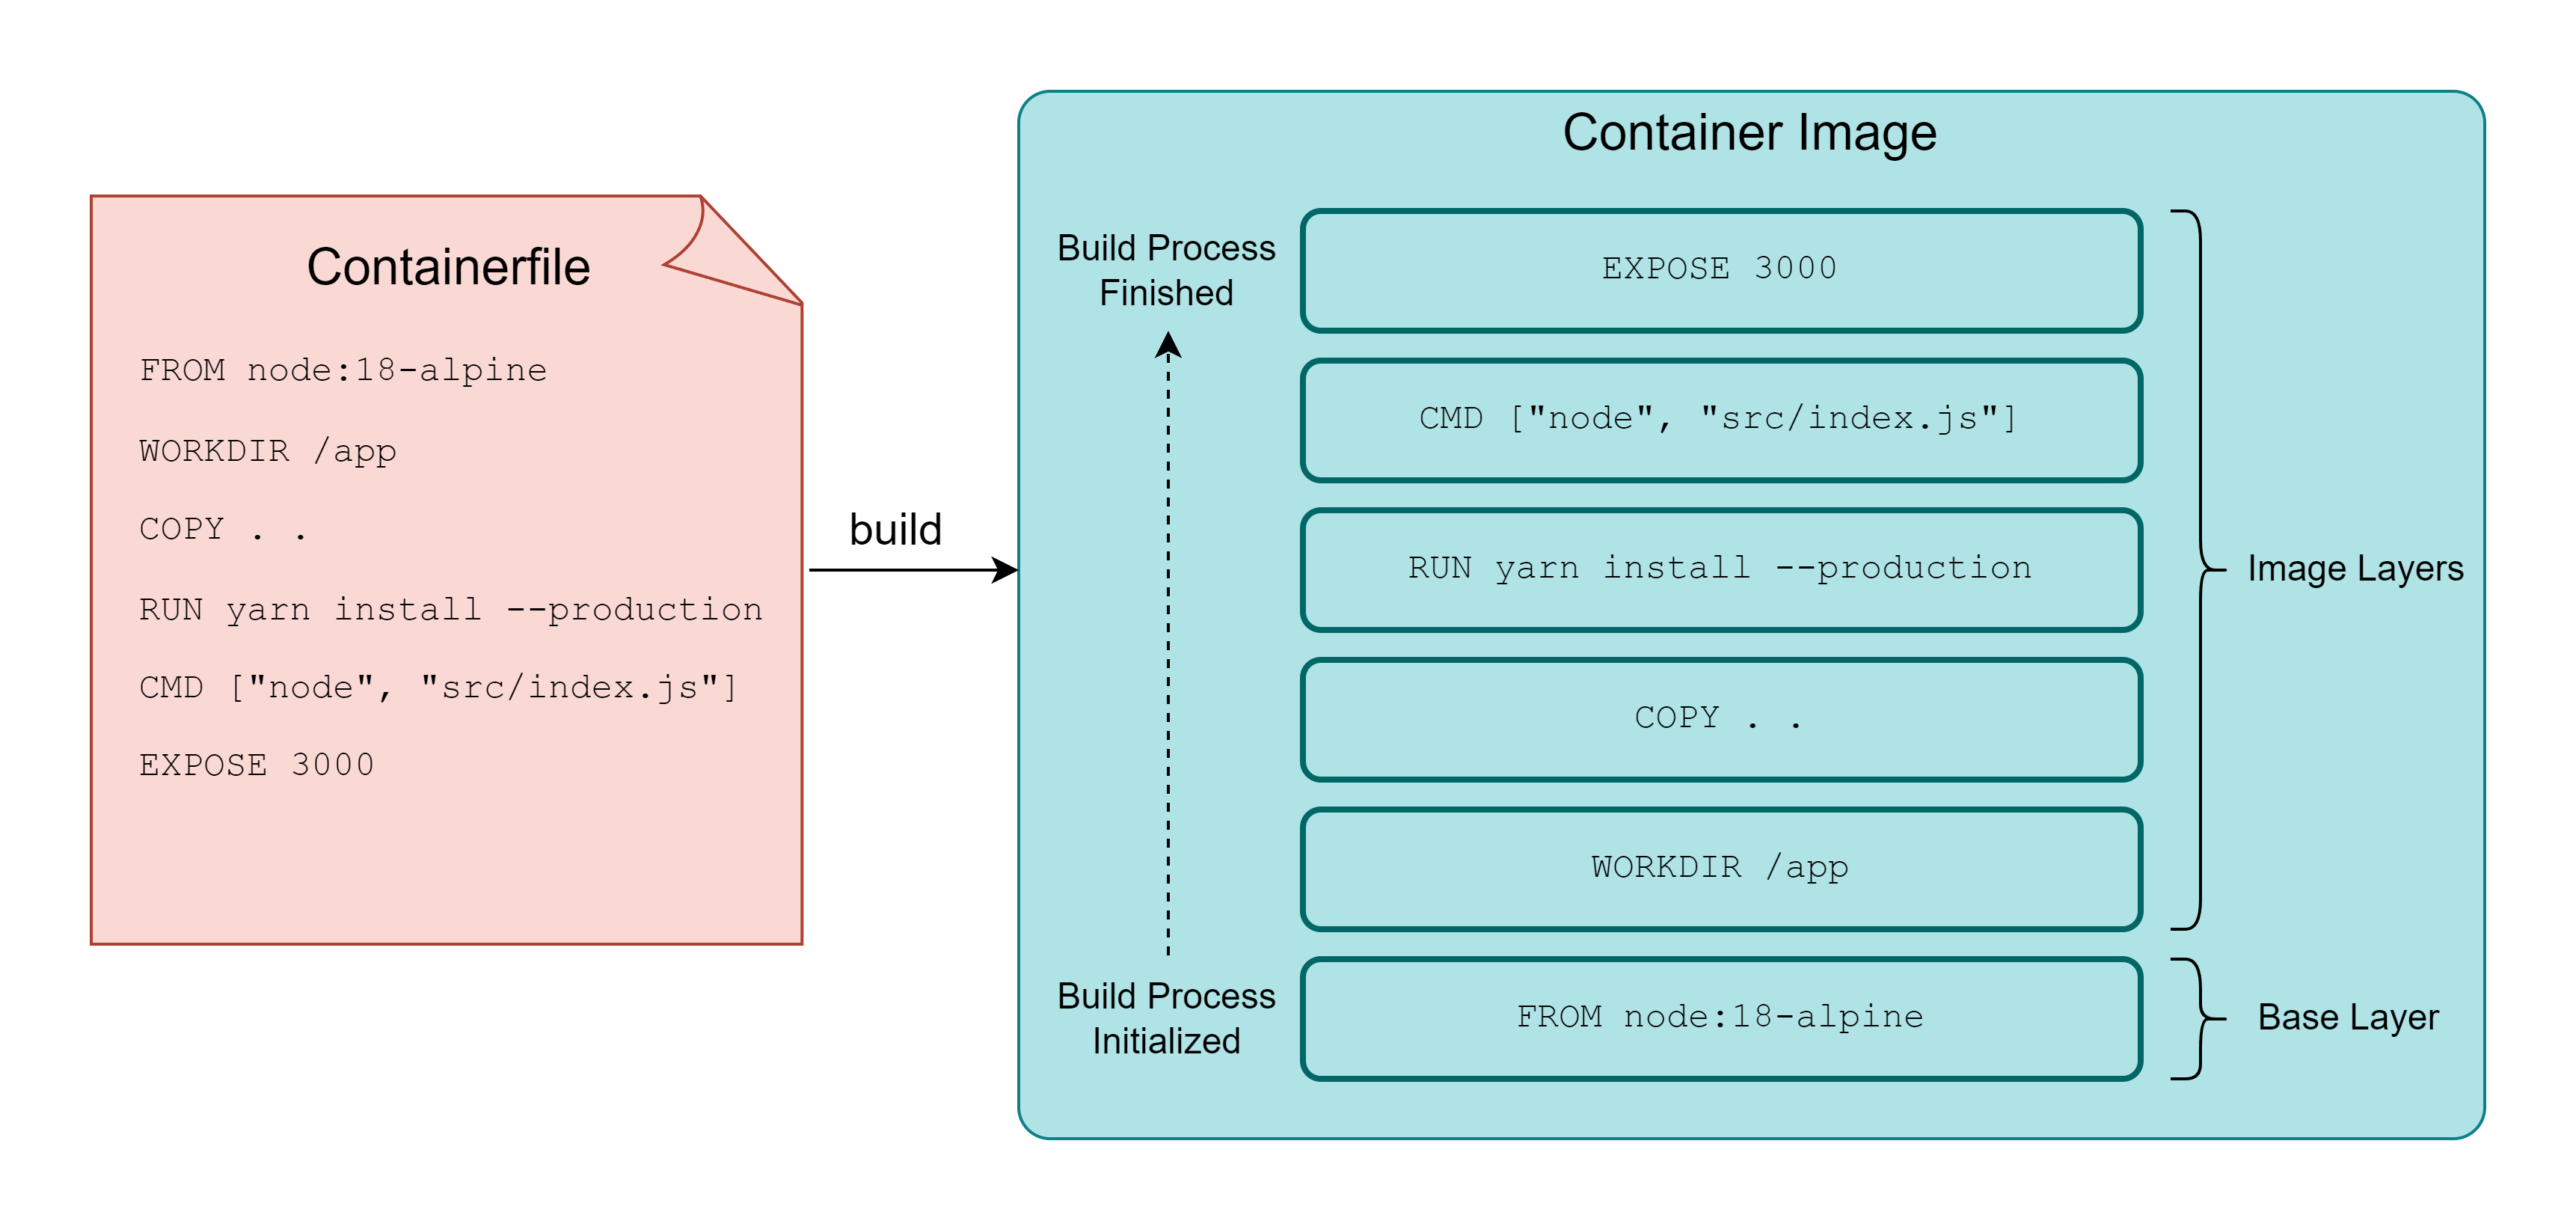 Building container images from Containerfile